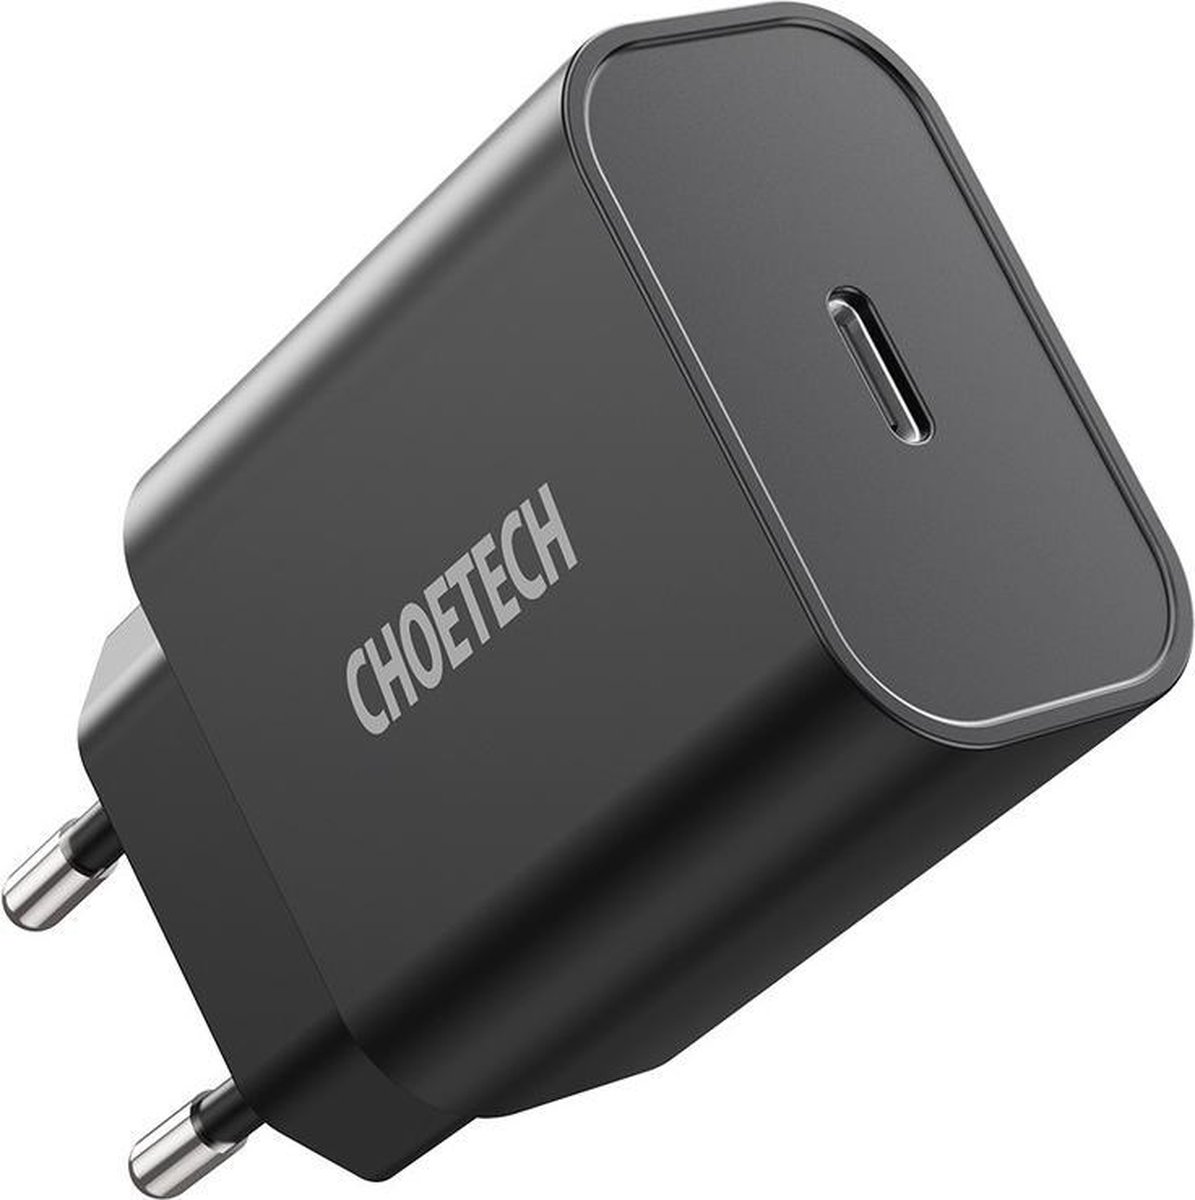 Choetech USB-C stroomadapter met Quick Charge 3.0 en PD 3.0 - 18W - Choetech